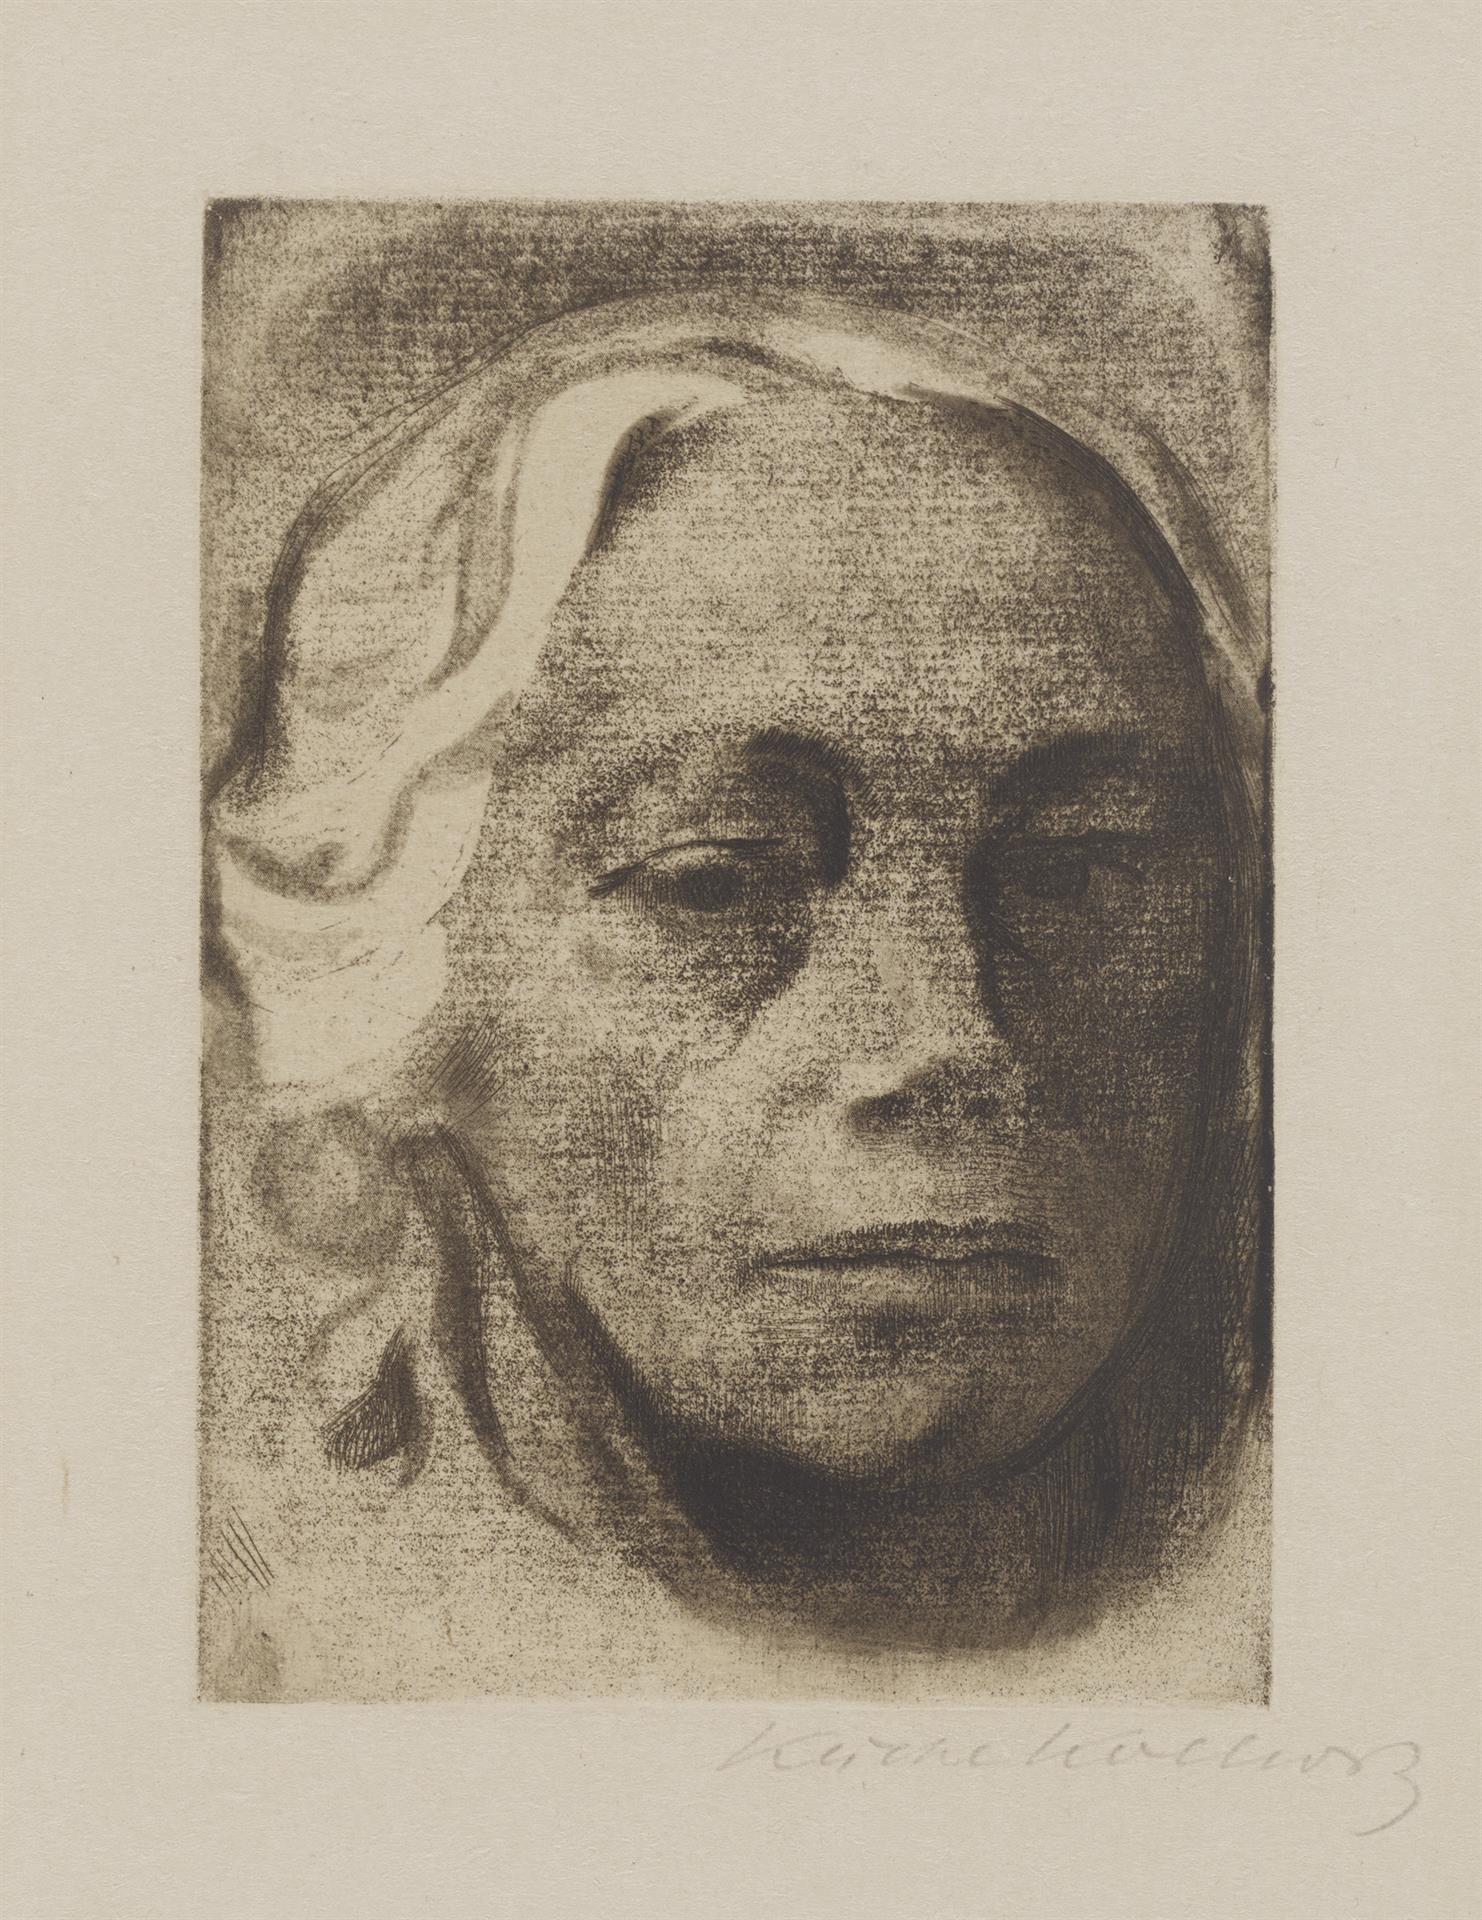 Käthe Kollwitz, Self-portrait, 1912, line etching, drypoint and soft ground with the imprint of laid paper and Ziegler’s transfer paper, Kn 126 VII a, Cologne Kollwitz Collection © Käthe Kollwitz Museum Köln